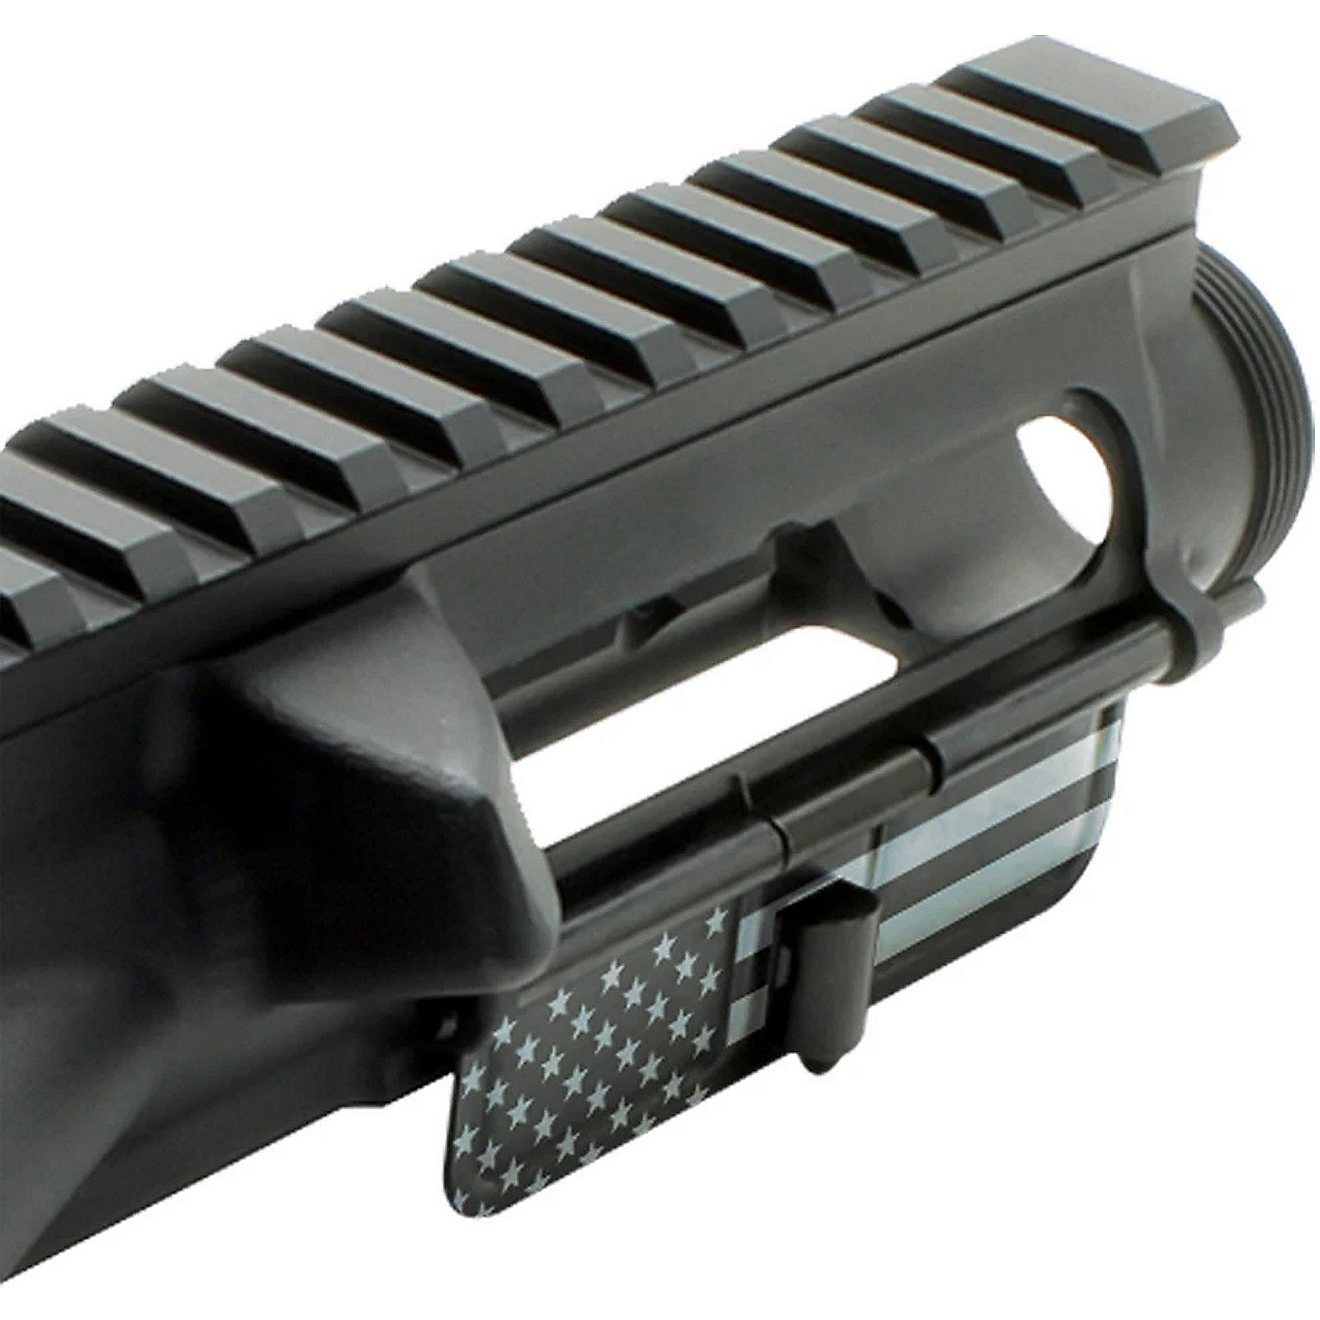 XTS Tactical AR-15 US Flag Ejection Port Cover Kit                                                                               - view number 2